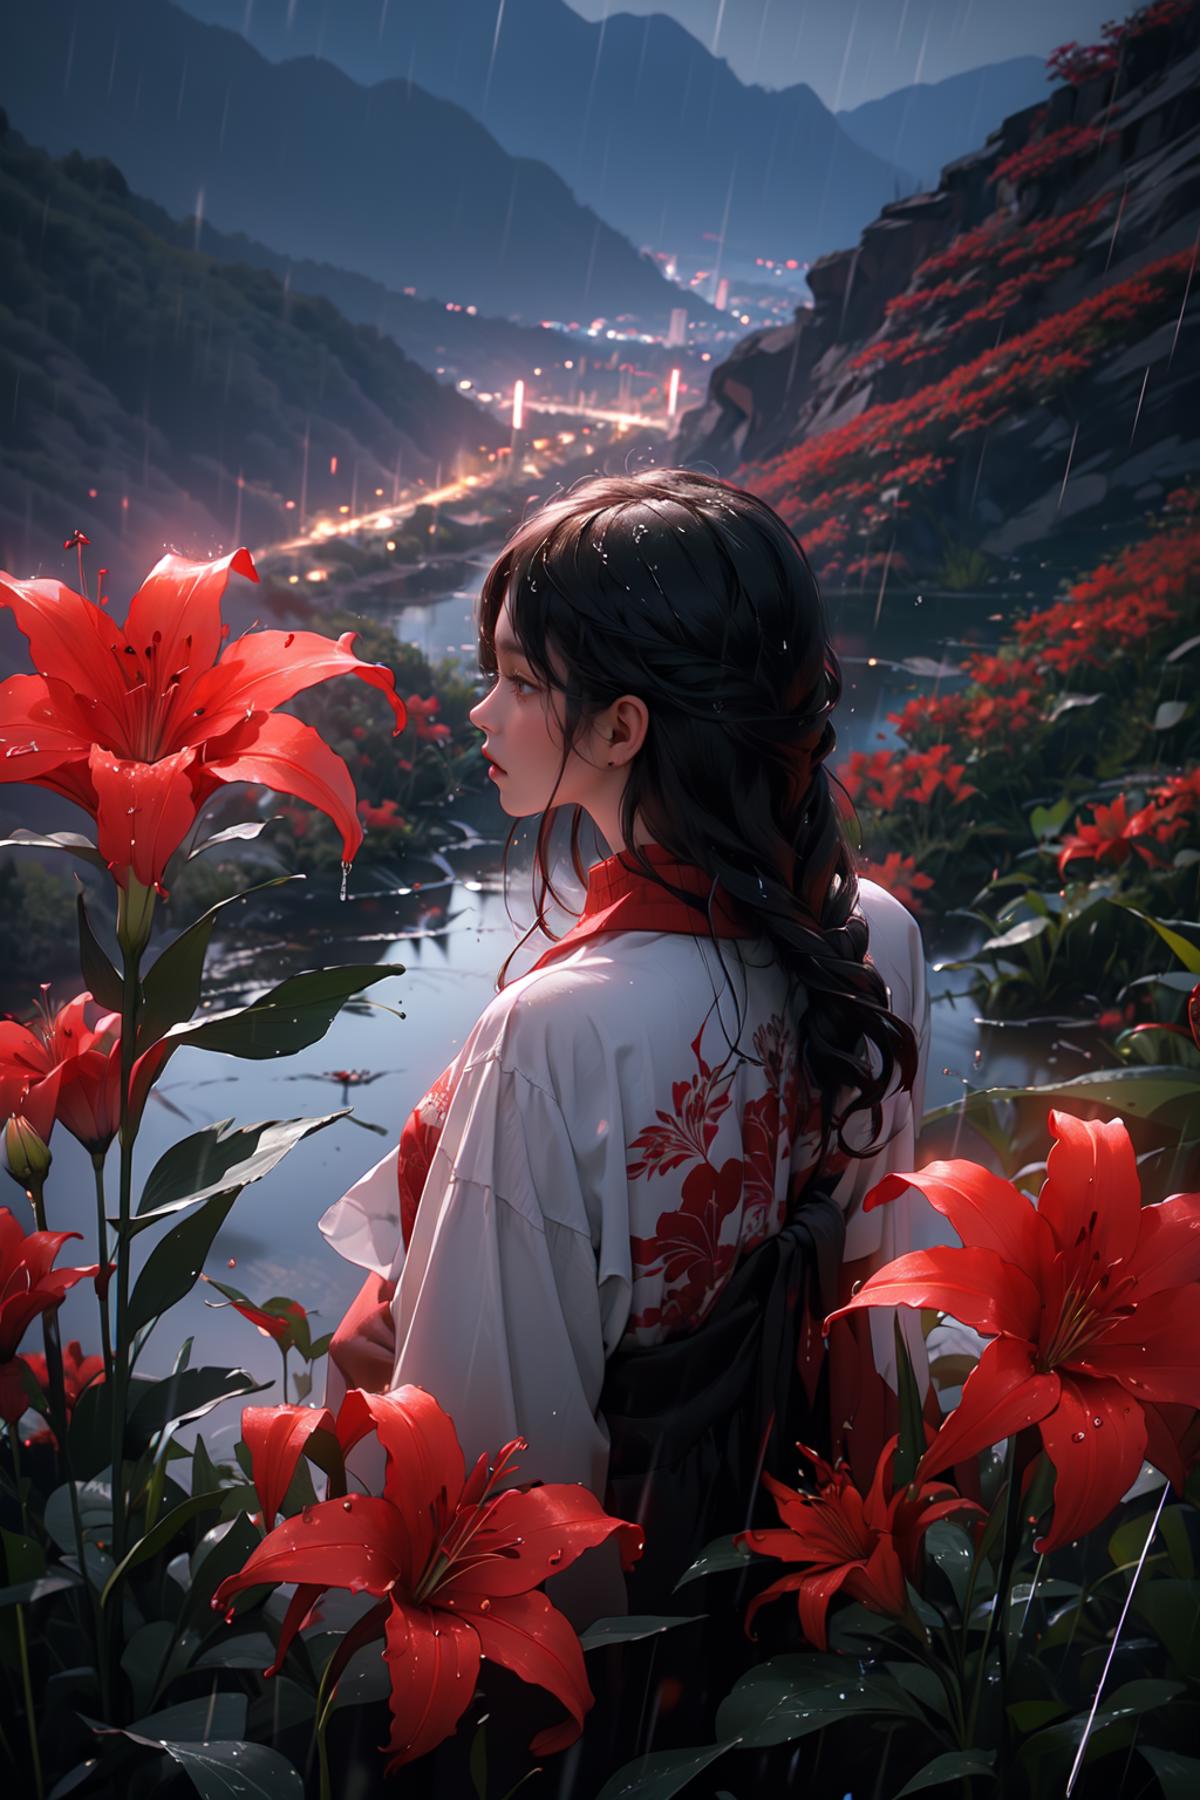 A girl standing in a field of flowers.